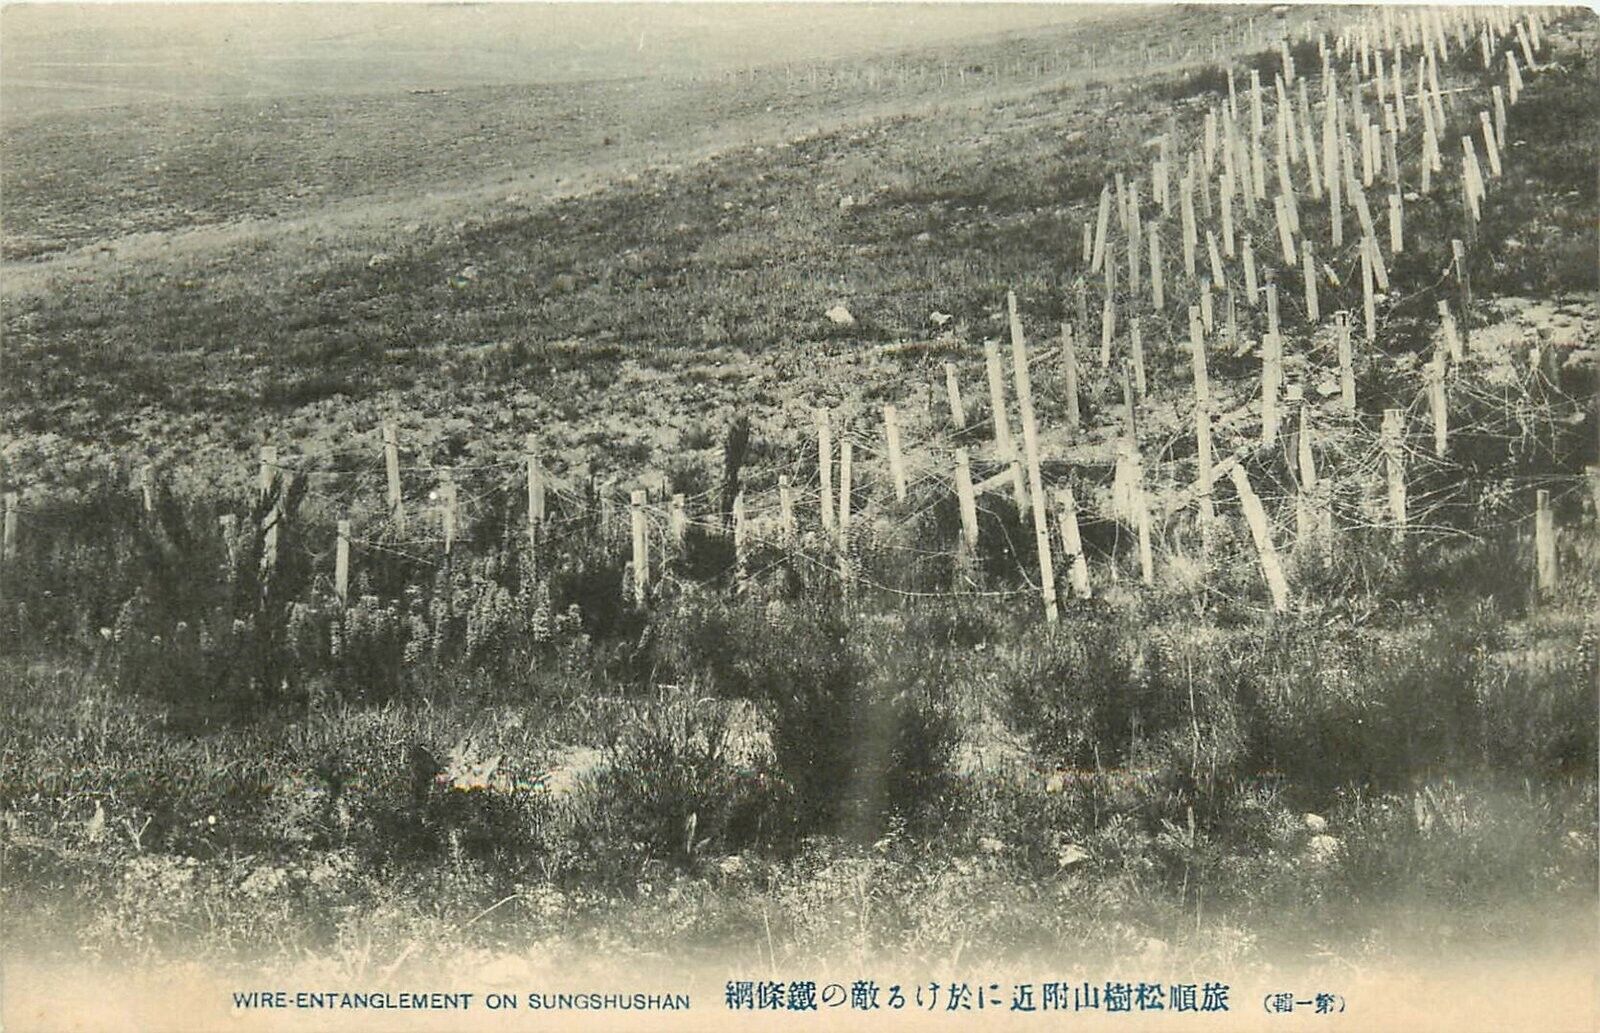 Postcard C-1910 Japan Russo war Sunghushan China Wire Entanglement FR24-3003